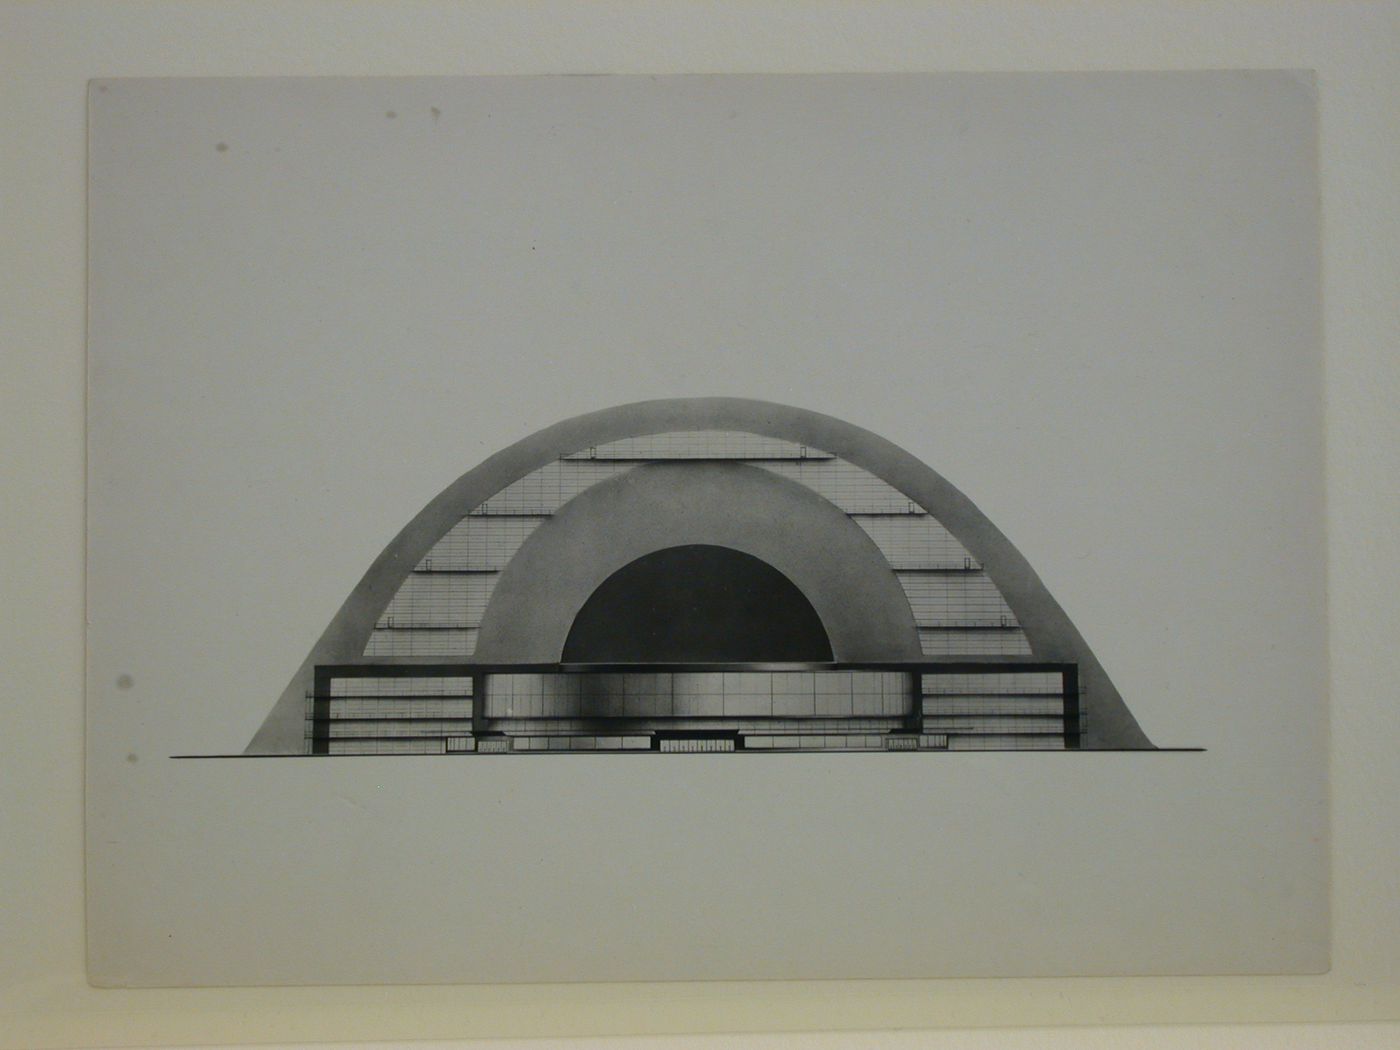 Photograph of an elevation for the first round of competition for a "synthetic theater" in Sverdlovsk, Soviet Union (now Ekaterinburg, Russia)